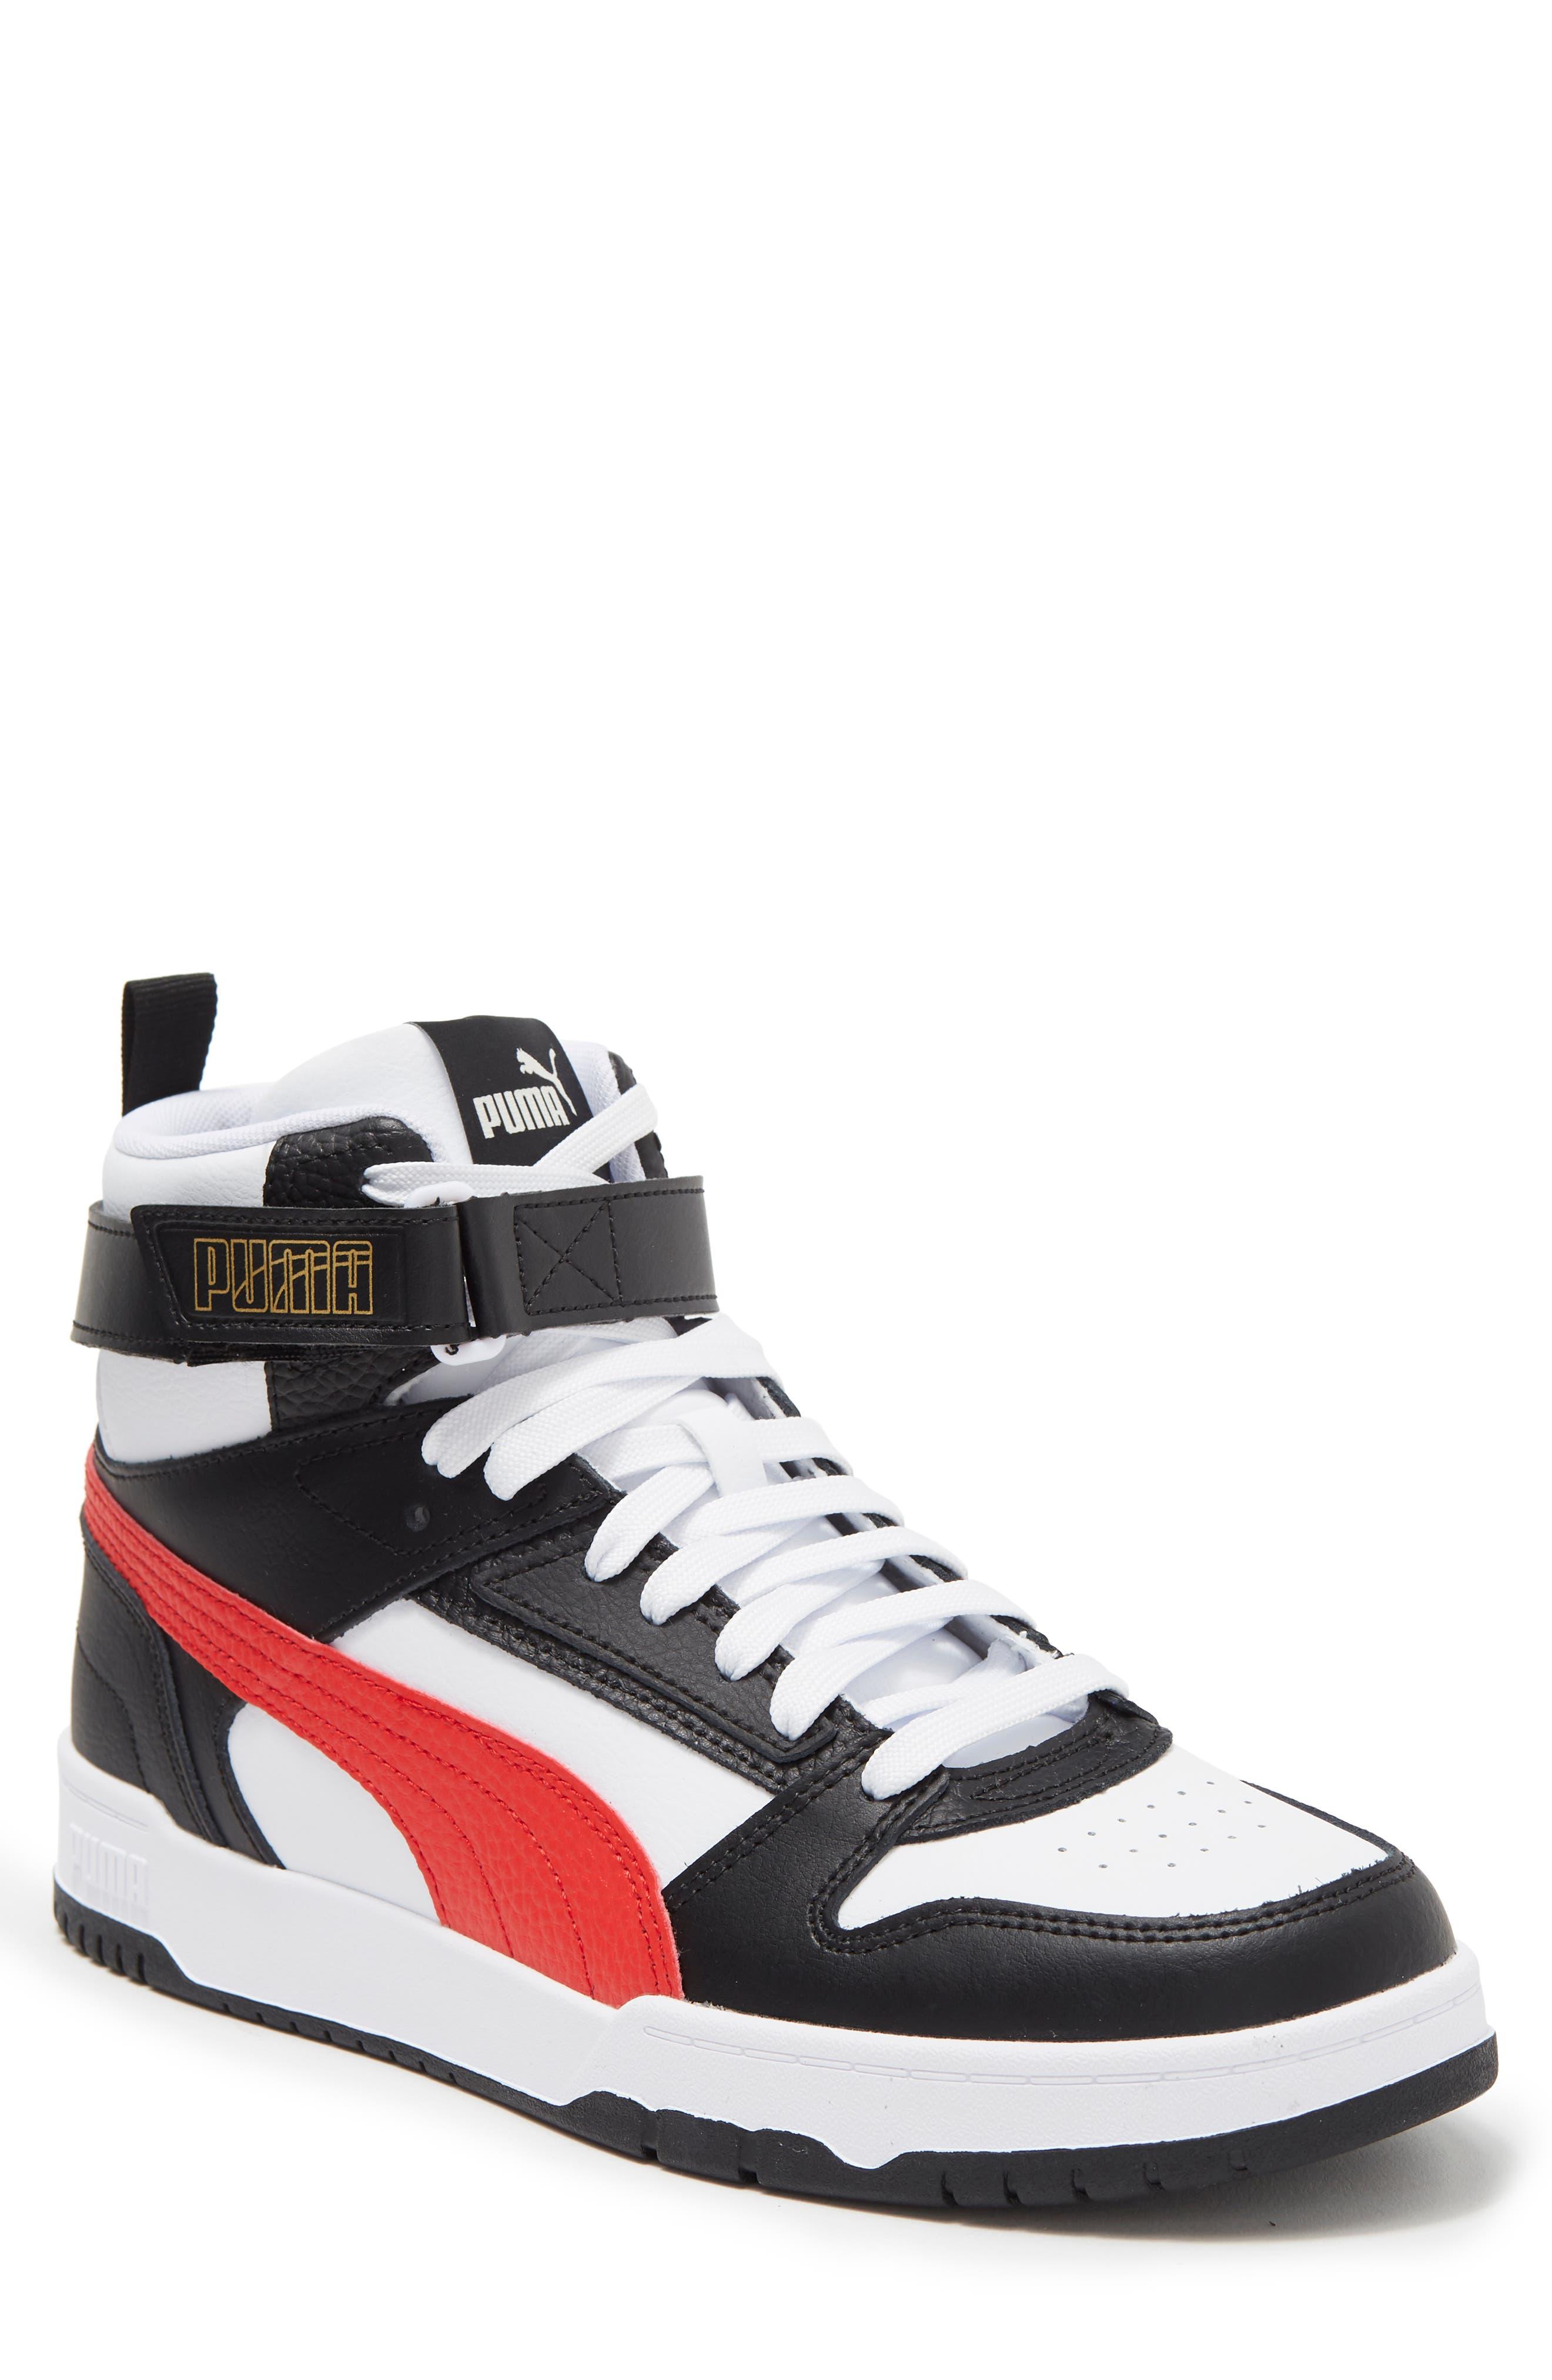 PUMA Rbd Game Mid Top Sneaker In White-red-black-team Gold At Nordstrom ...